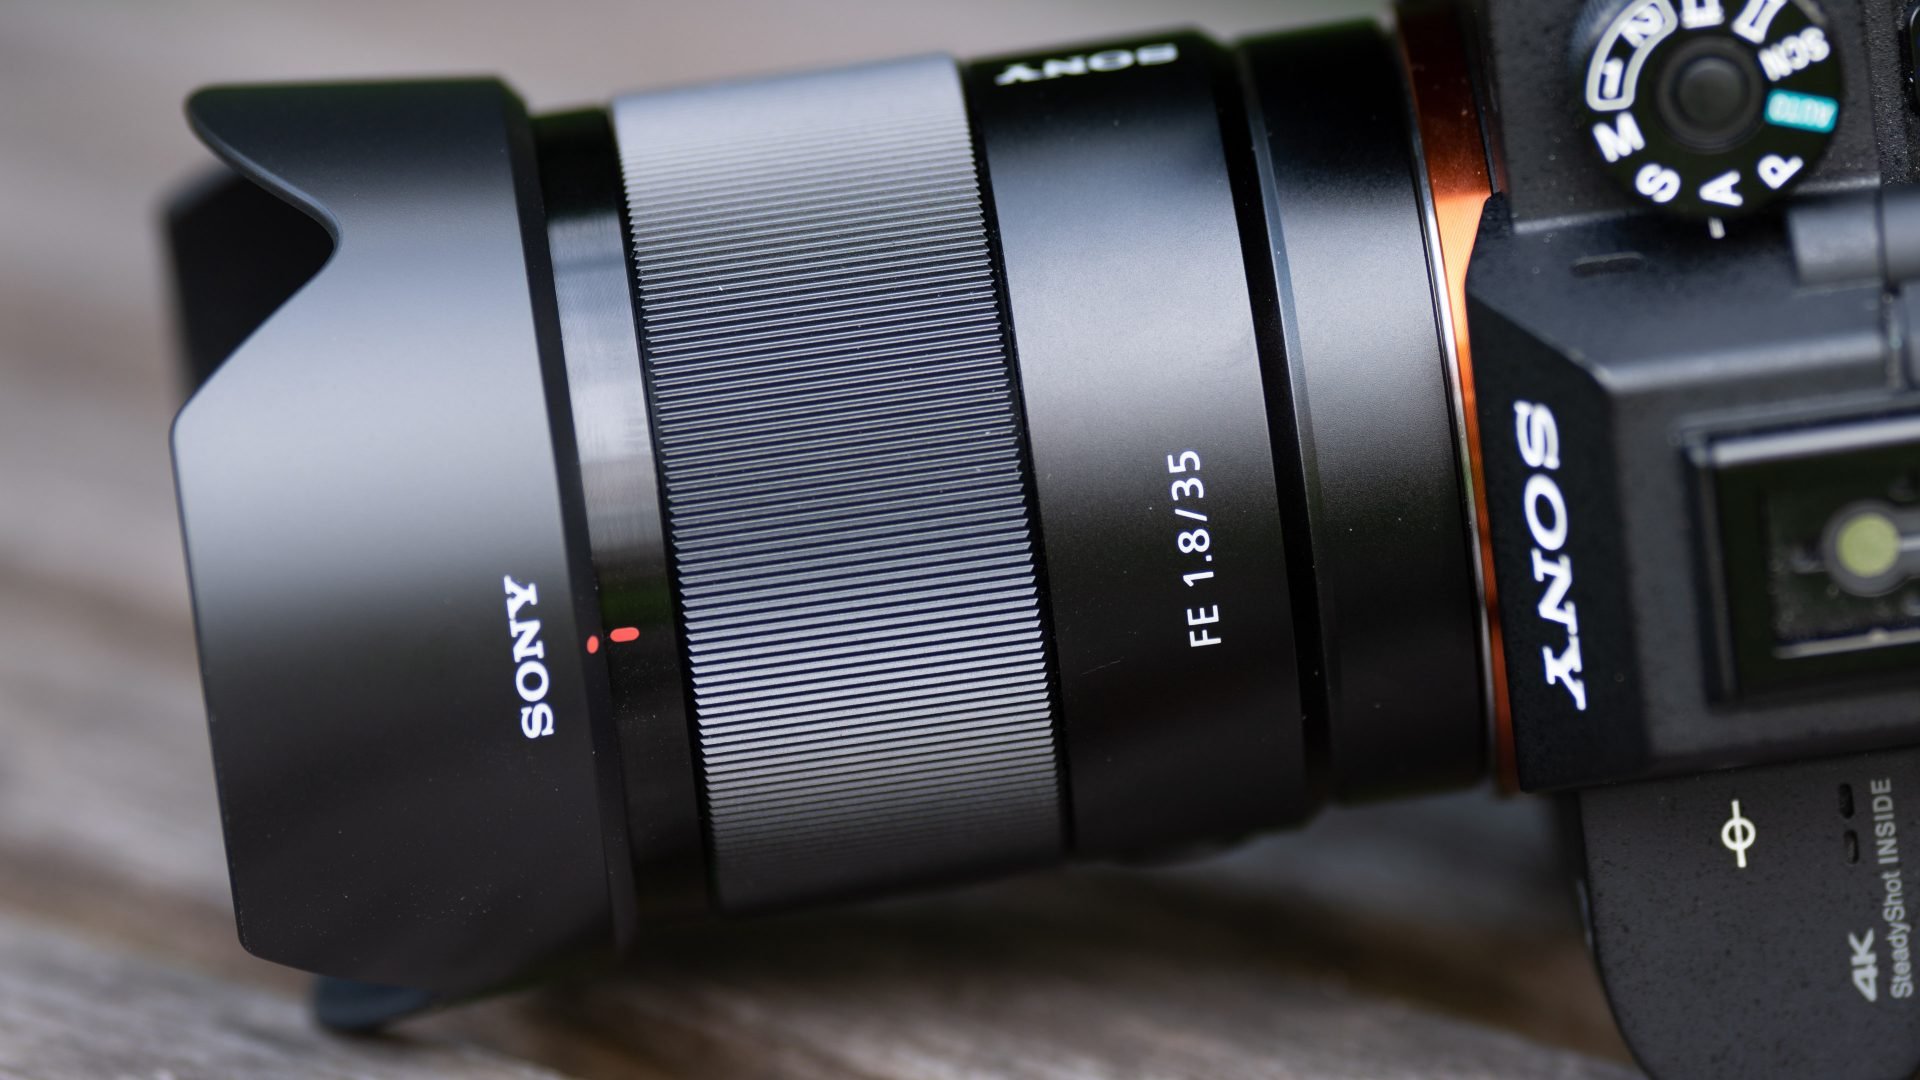 Sony FE 35mm f1.8 review | Cameralabs